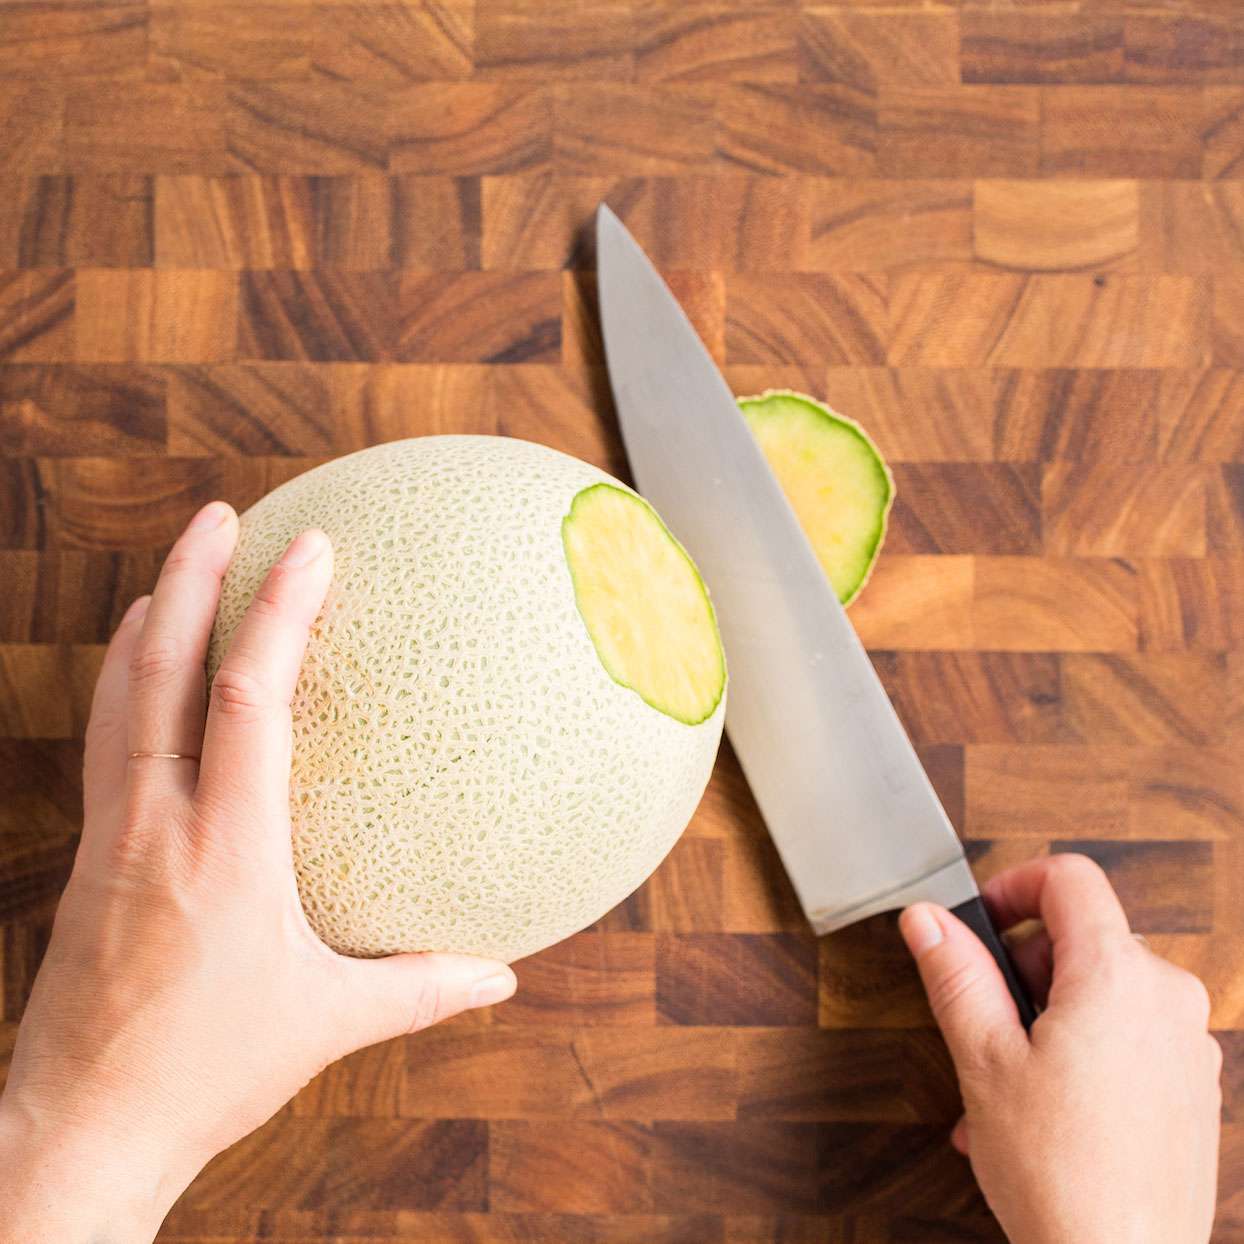 knife slicing top of cantaloupe on wooden cutting board